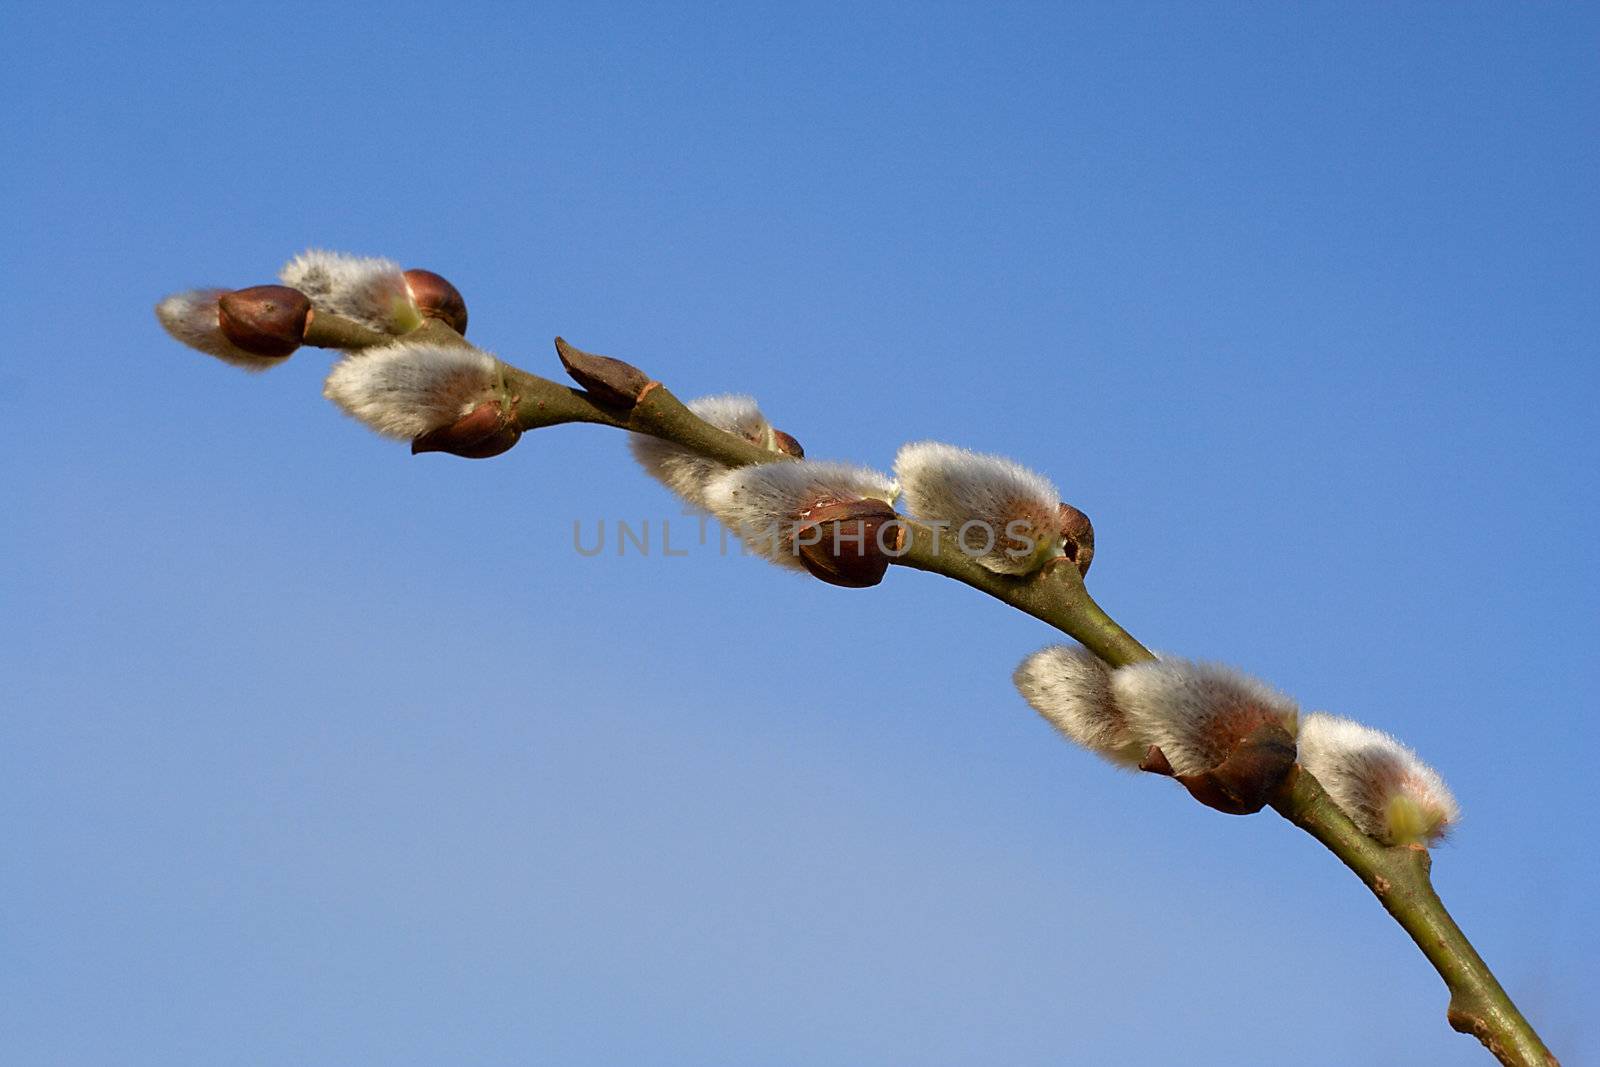 close-up pussy-willow branch against blue sky background